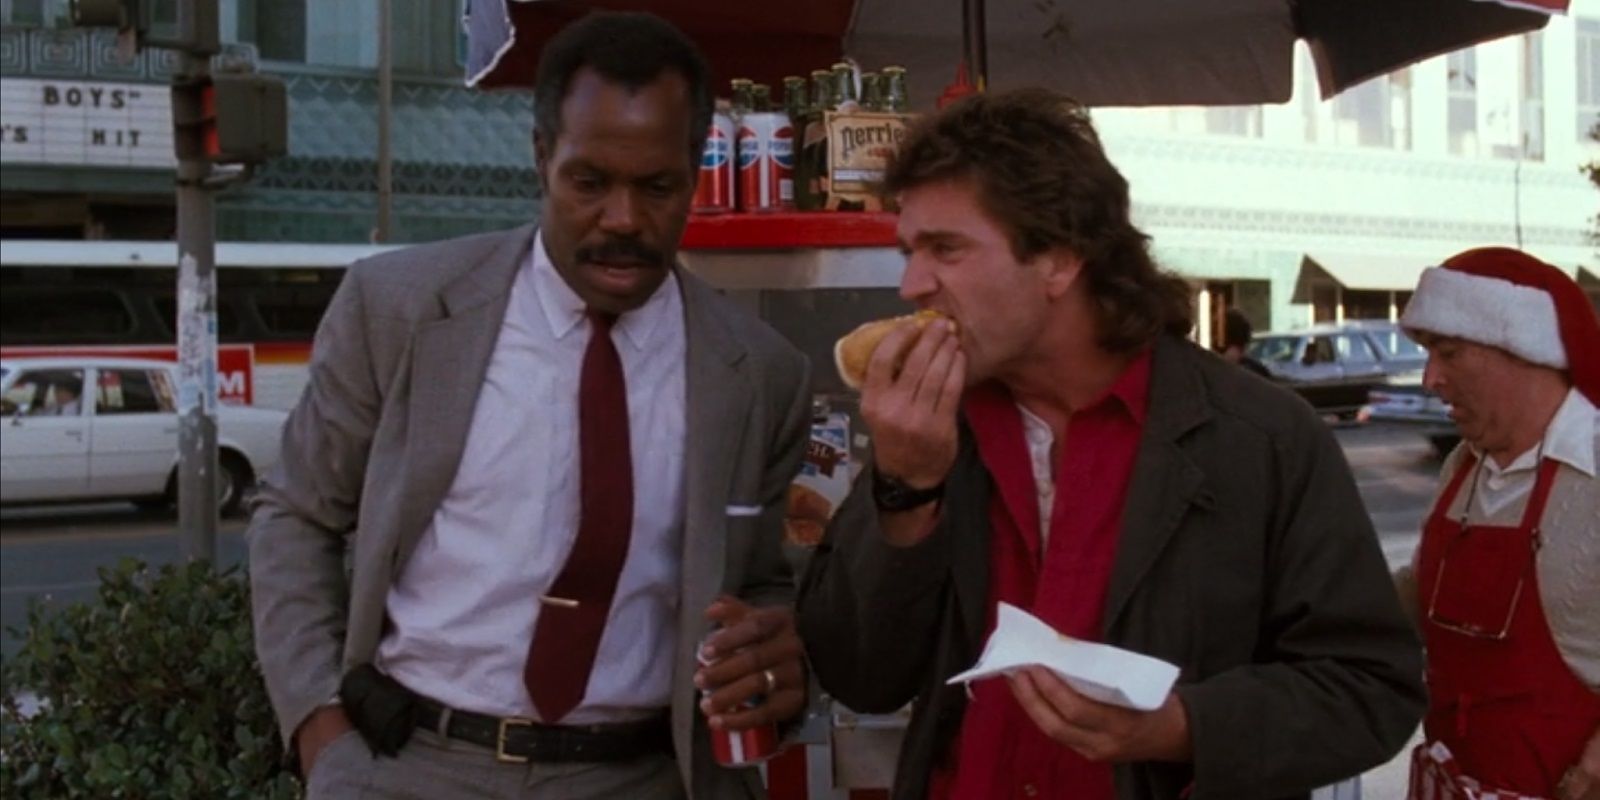 Riggs and Murtaugh at a hot dog stand in Lethal Weapon